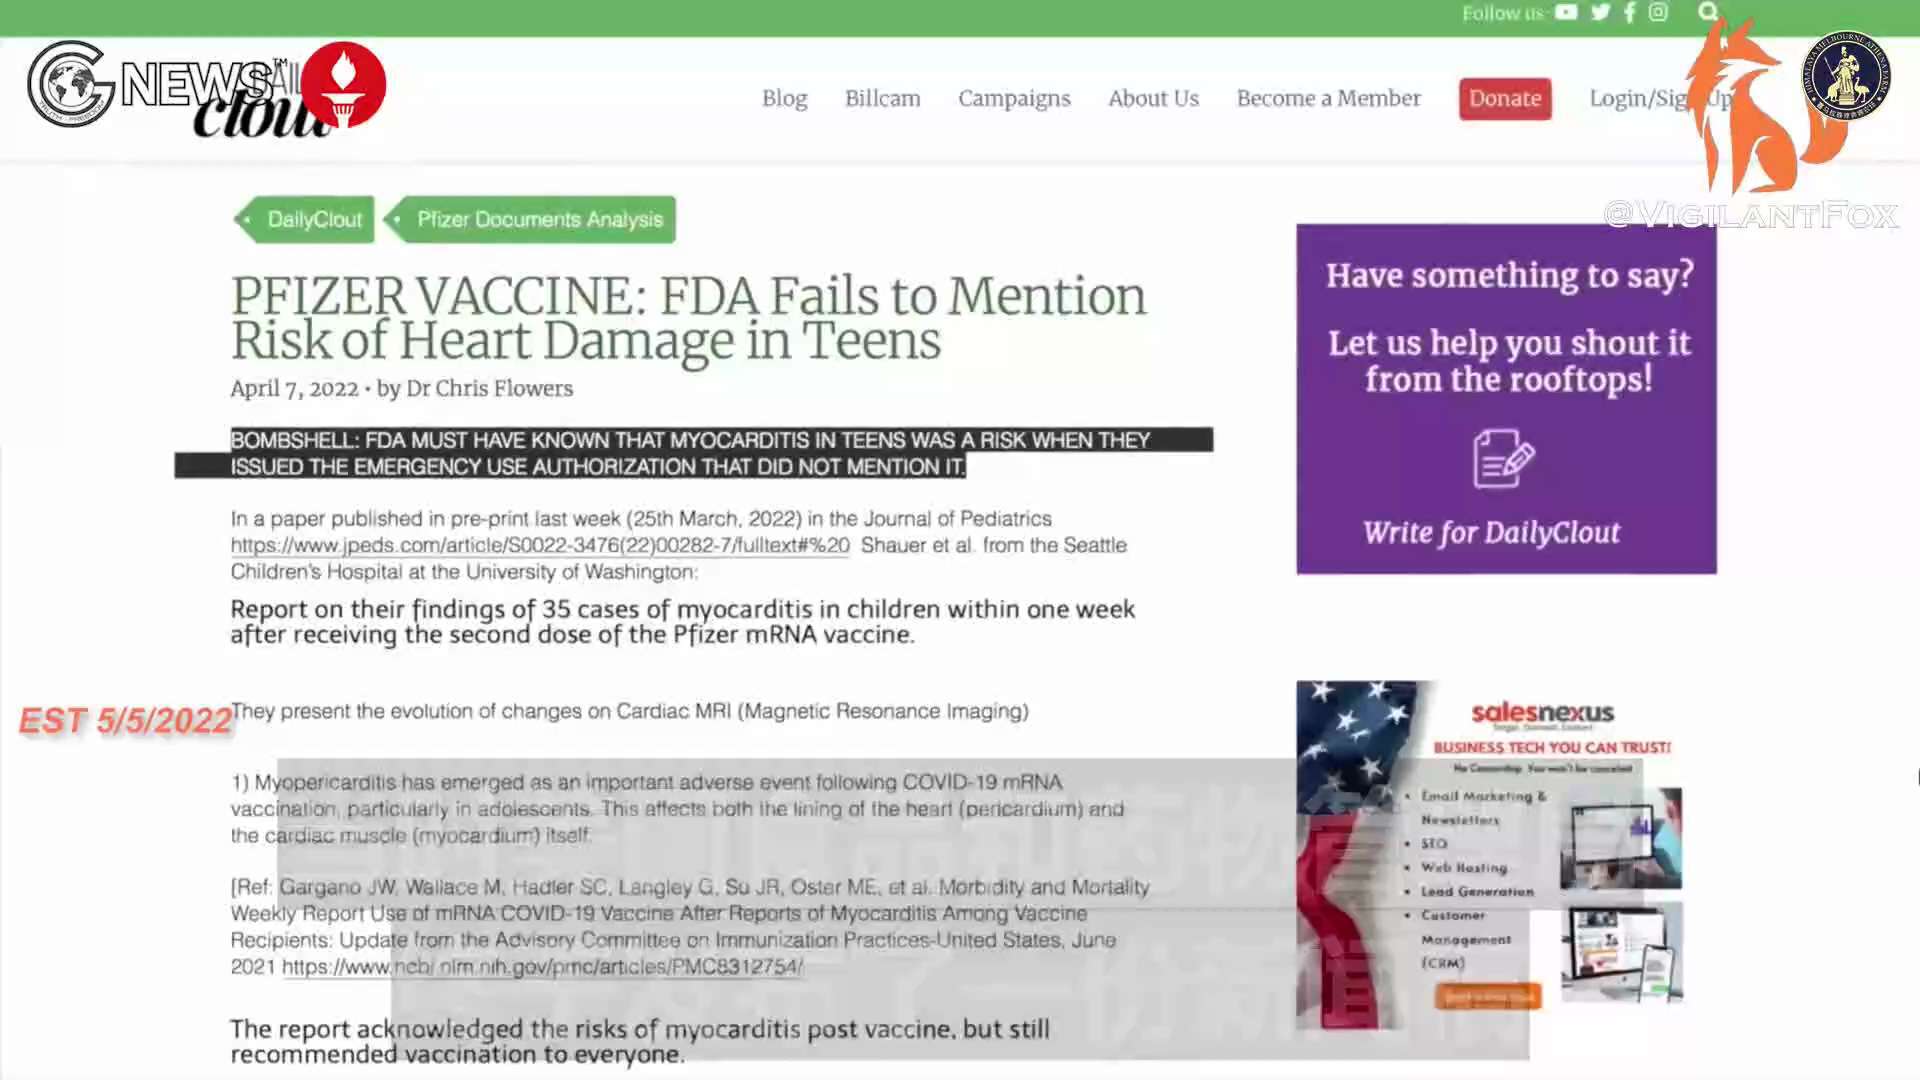 Intent to Harm: The FDA and Pfizer Knew About Myocarditis Risks in Teens Months Before Letting Parents Know 伤害意图：在让父母知道的几个月之前，FDA 和辉瑞就知道青少年的心肌炎风险